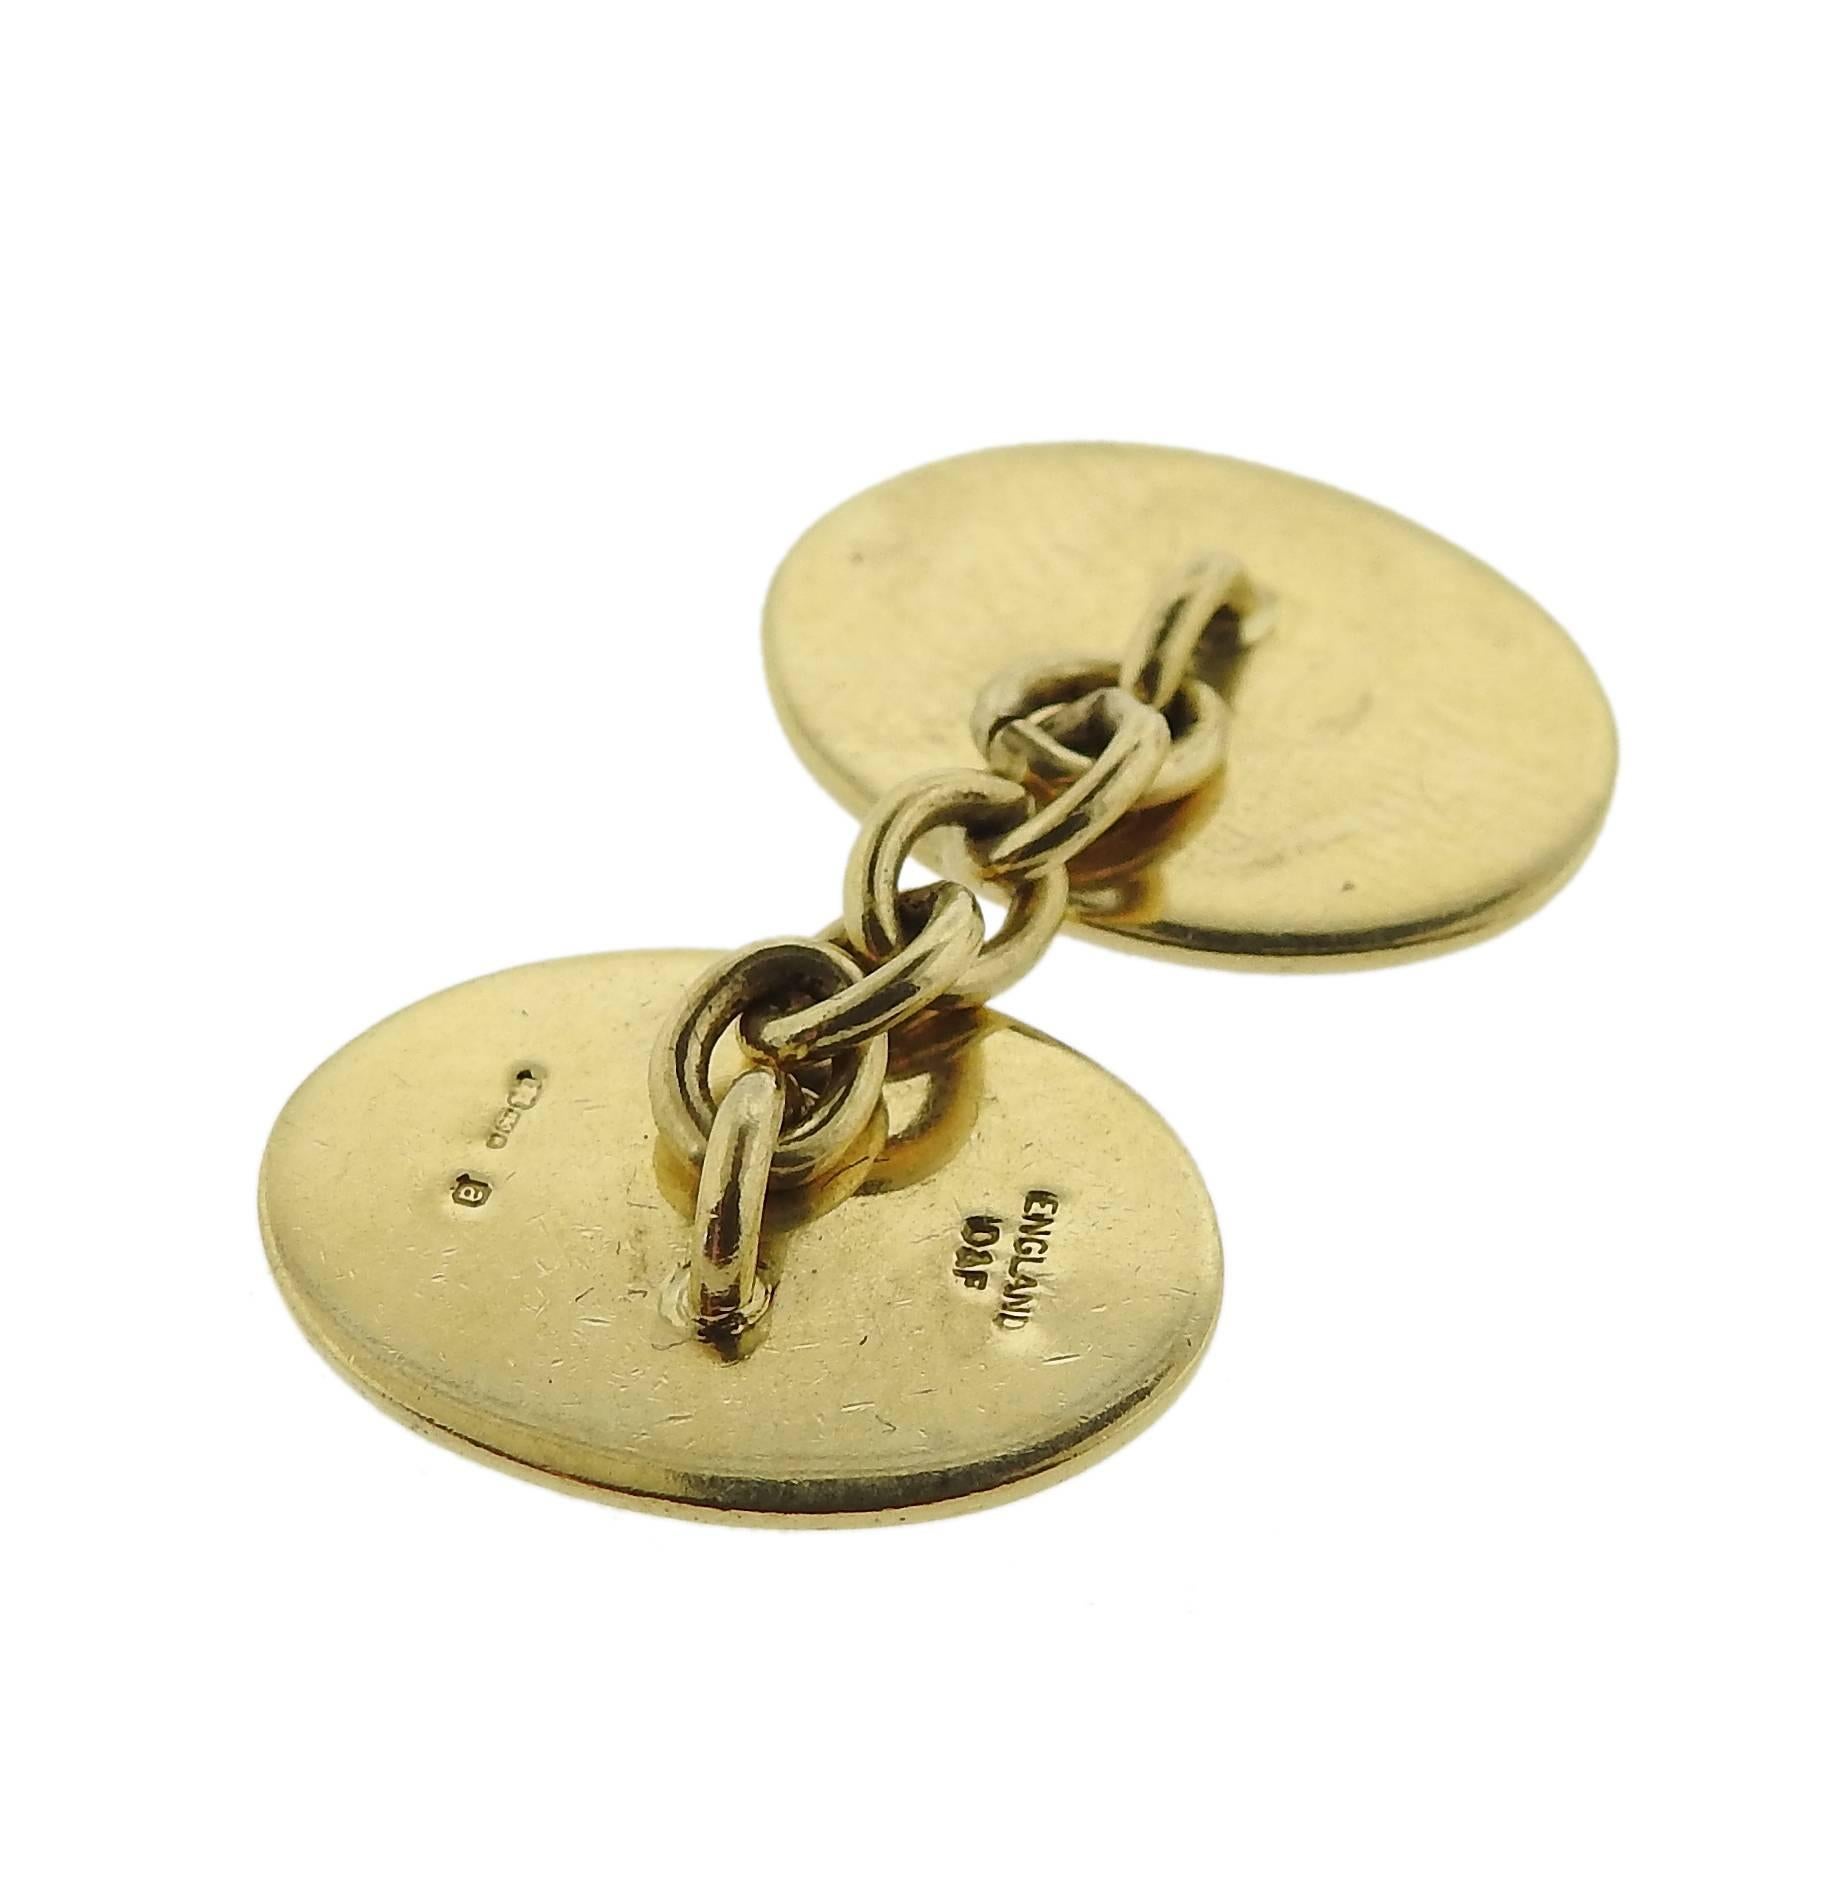 Pair of 18k gold and enamel cufflinks, crafted by Deakin & Francis, depicting the "four vices". Each top measures 19mm x 14mm.  Marked: England, D & F, English marks. Weight - 15.4 grams